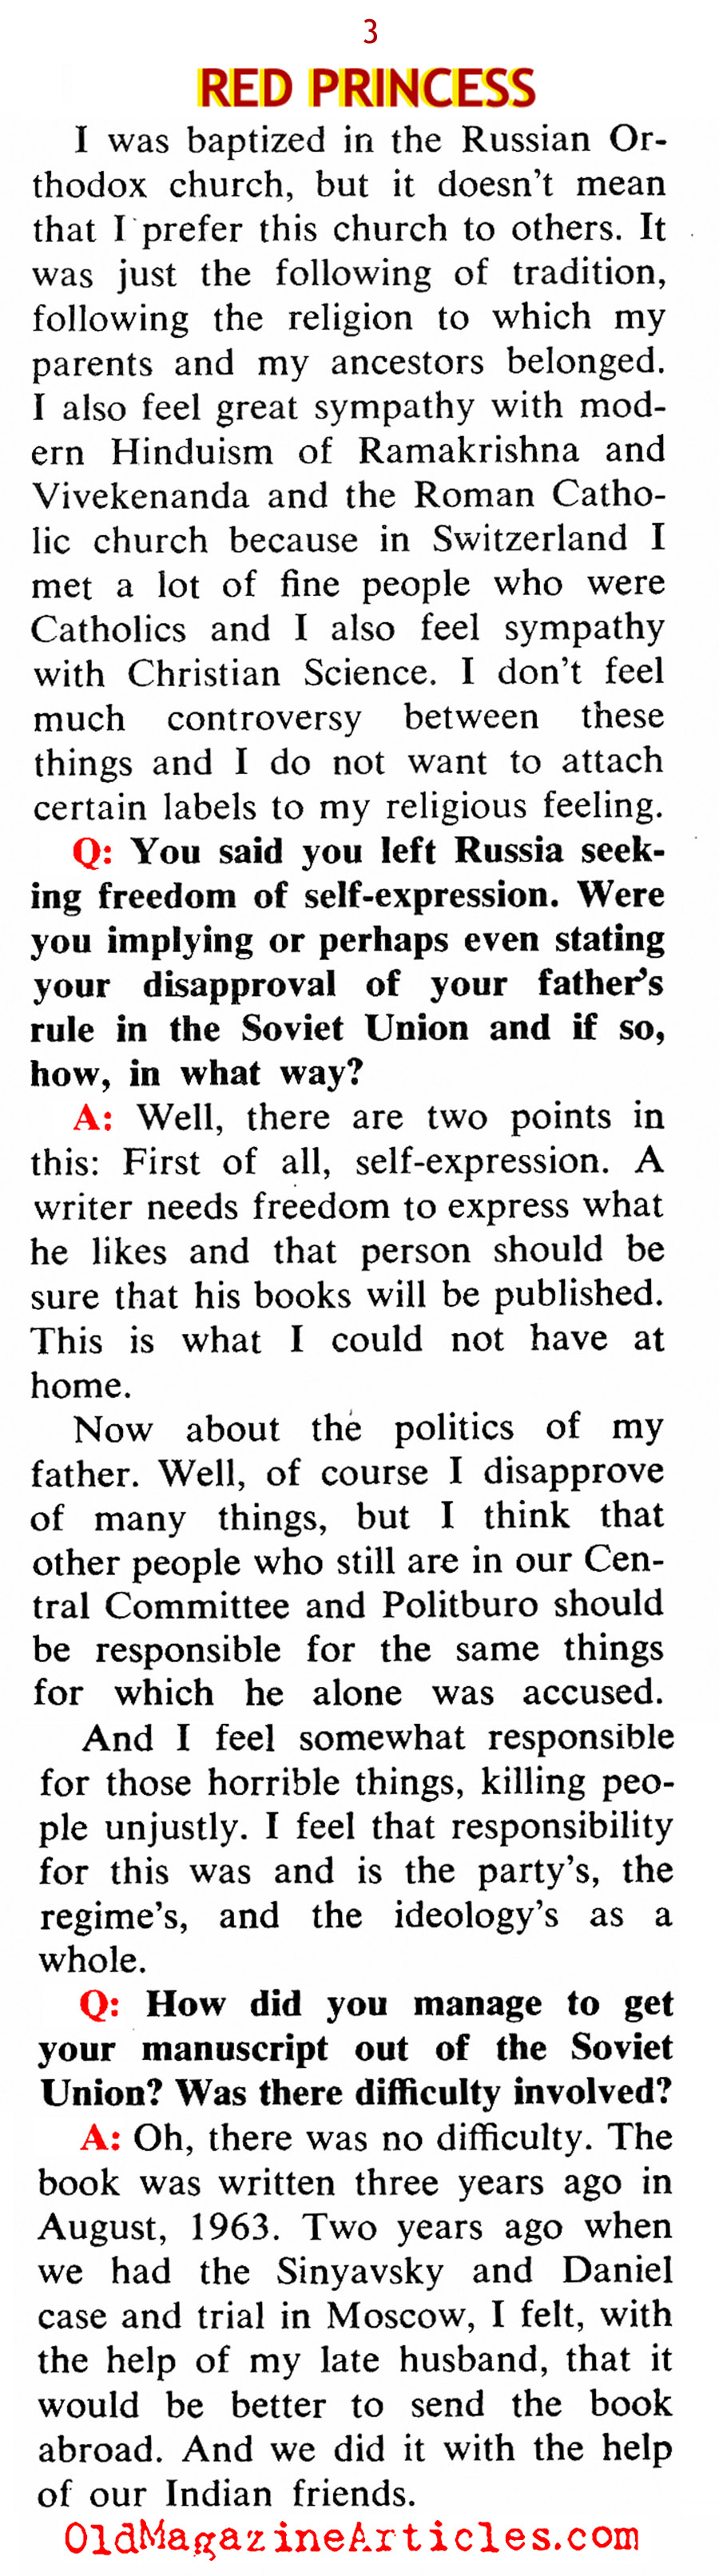 The Defection of Stalin's Daughter (Coronet Magazine, 1967)